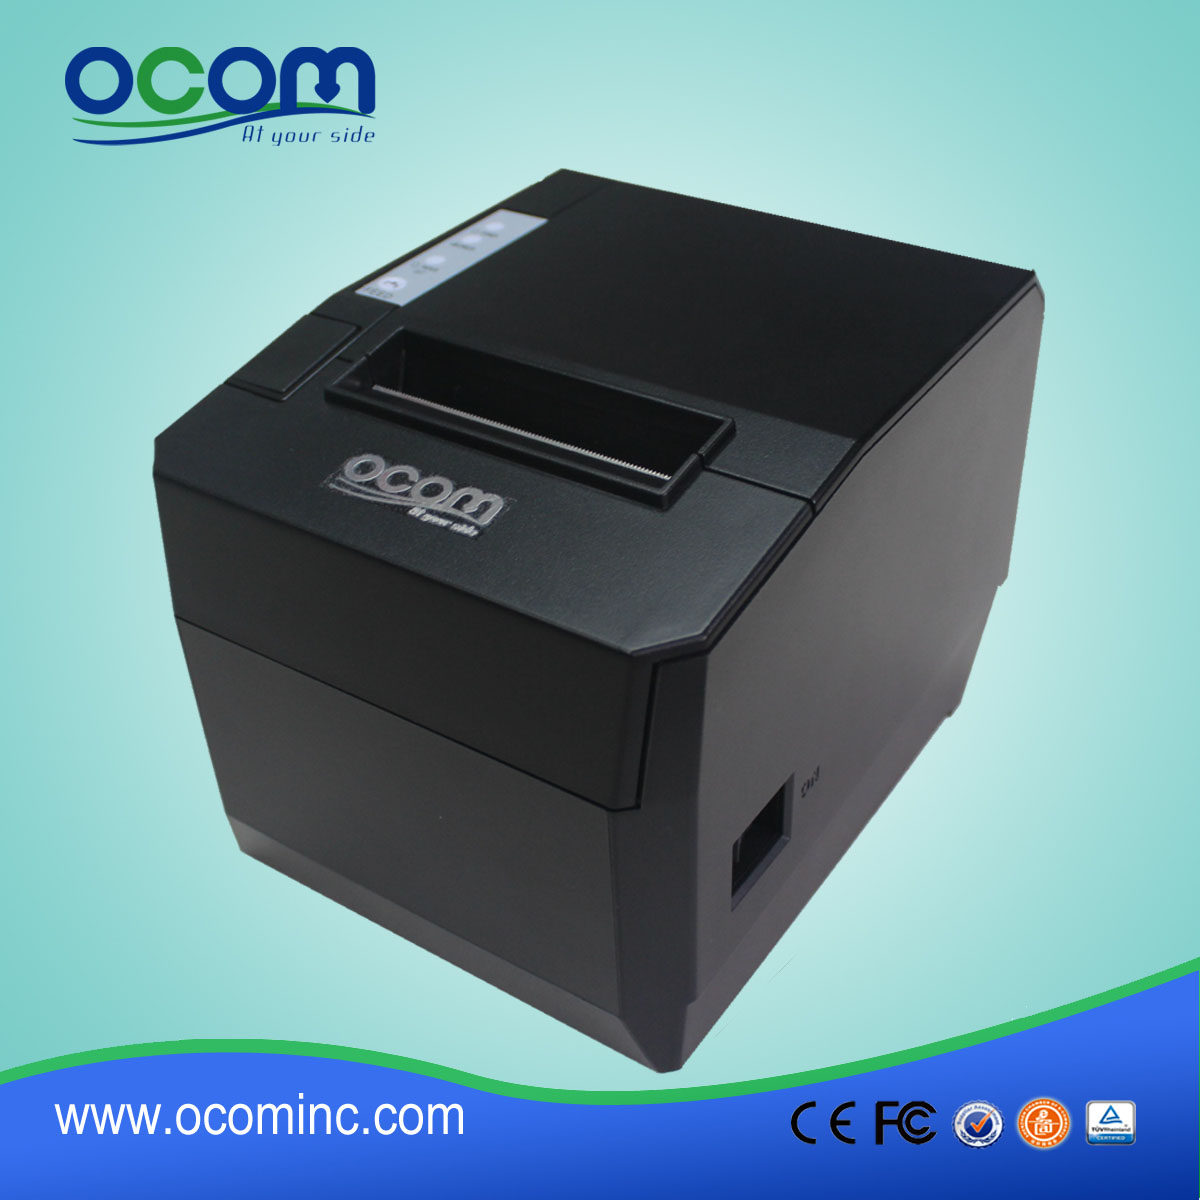 80mm Android USB thermische printer OCPP-88A-U